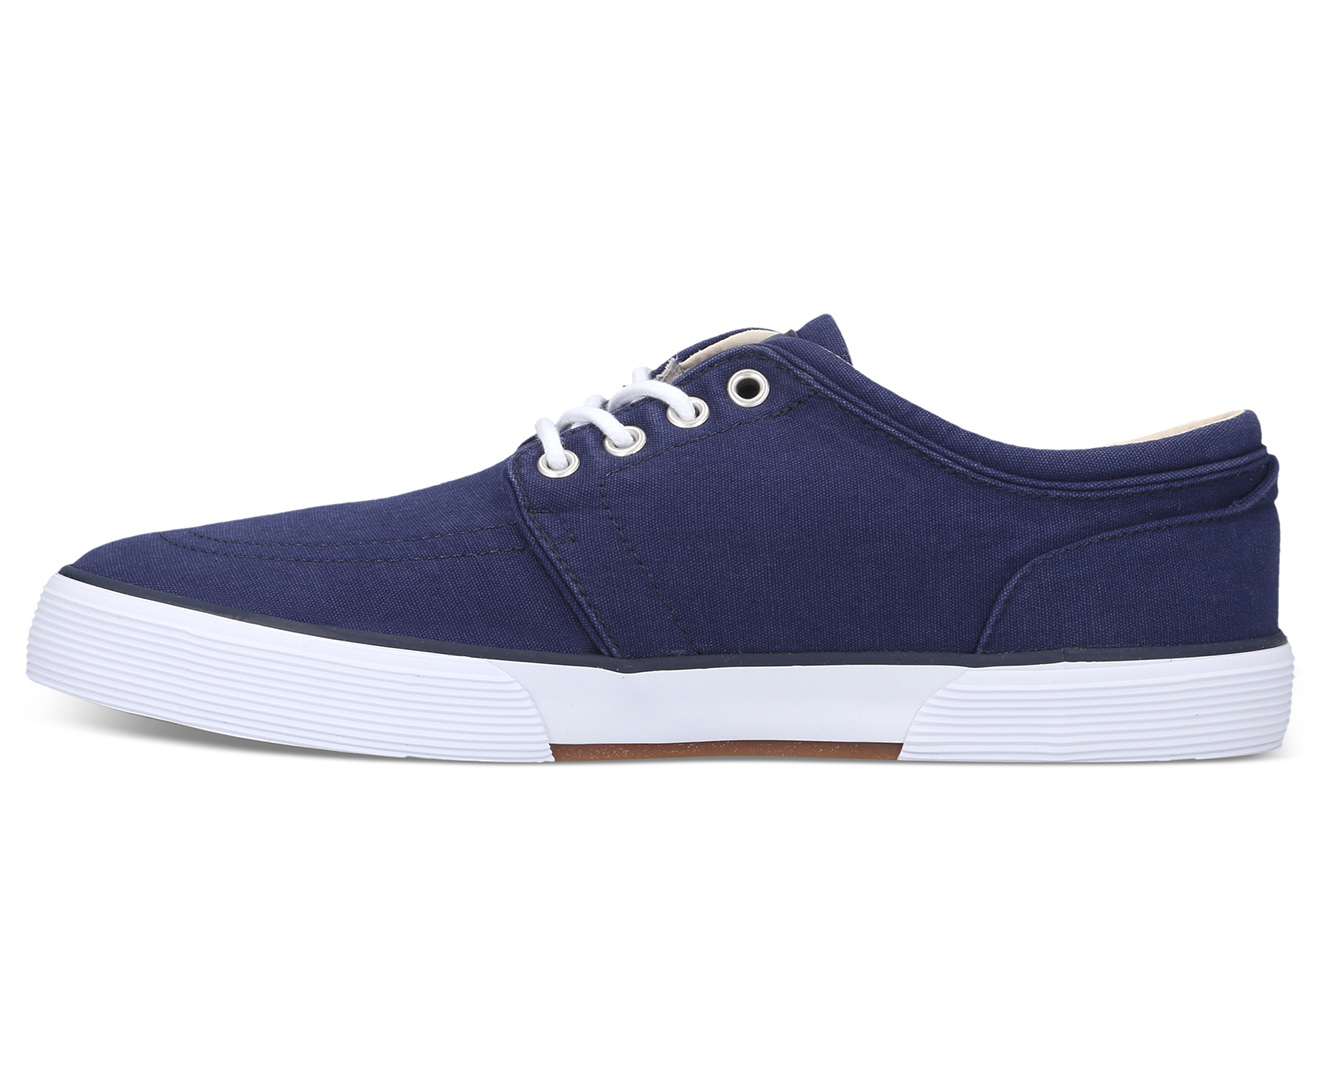 Polo Ralph Lauren Men's Faxon Low Washed Canvas Sneakers - Navy | Catch ...